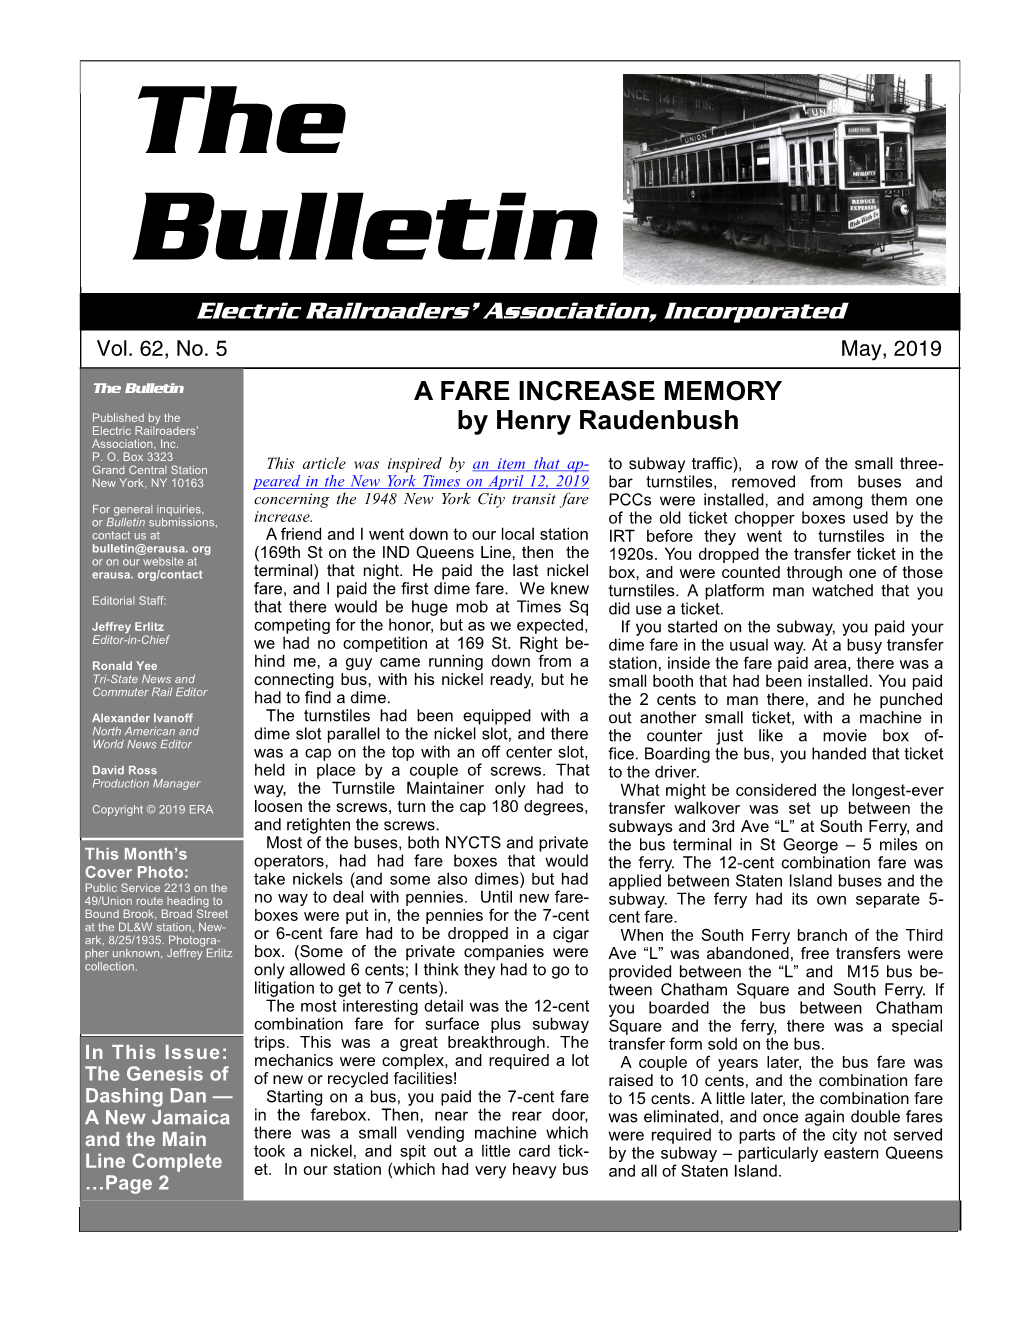 The Bulletin a FARE INCREASE MEMORY Published by the Electric Railroaders’ by Henry Raudenbush Association, Inc